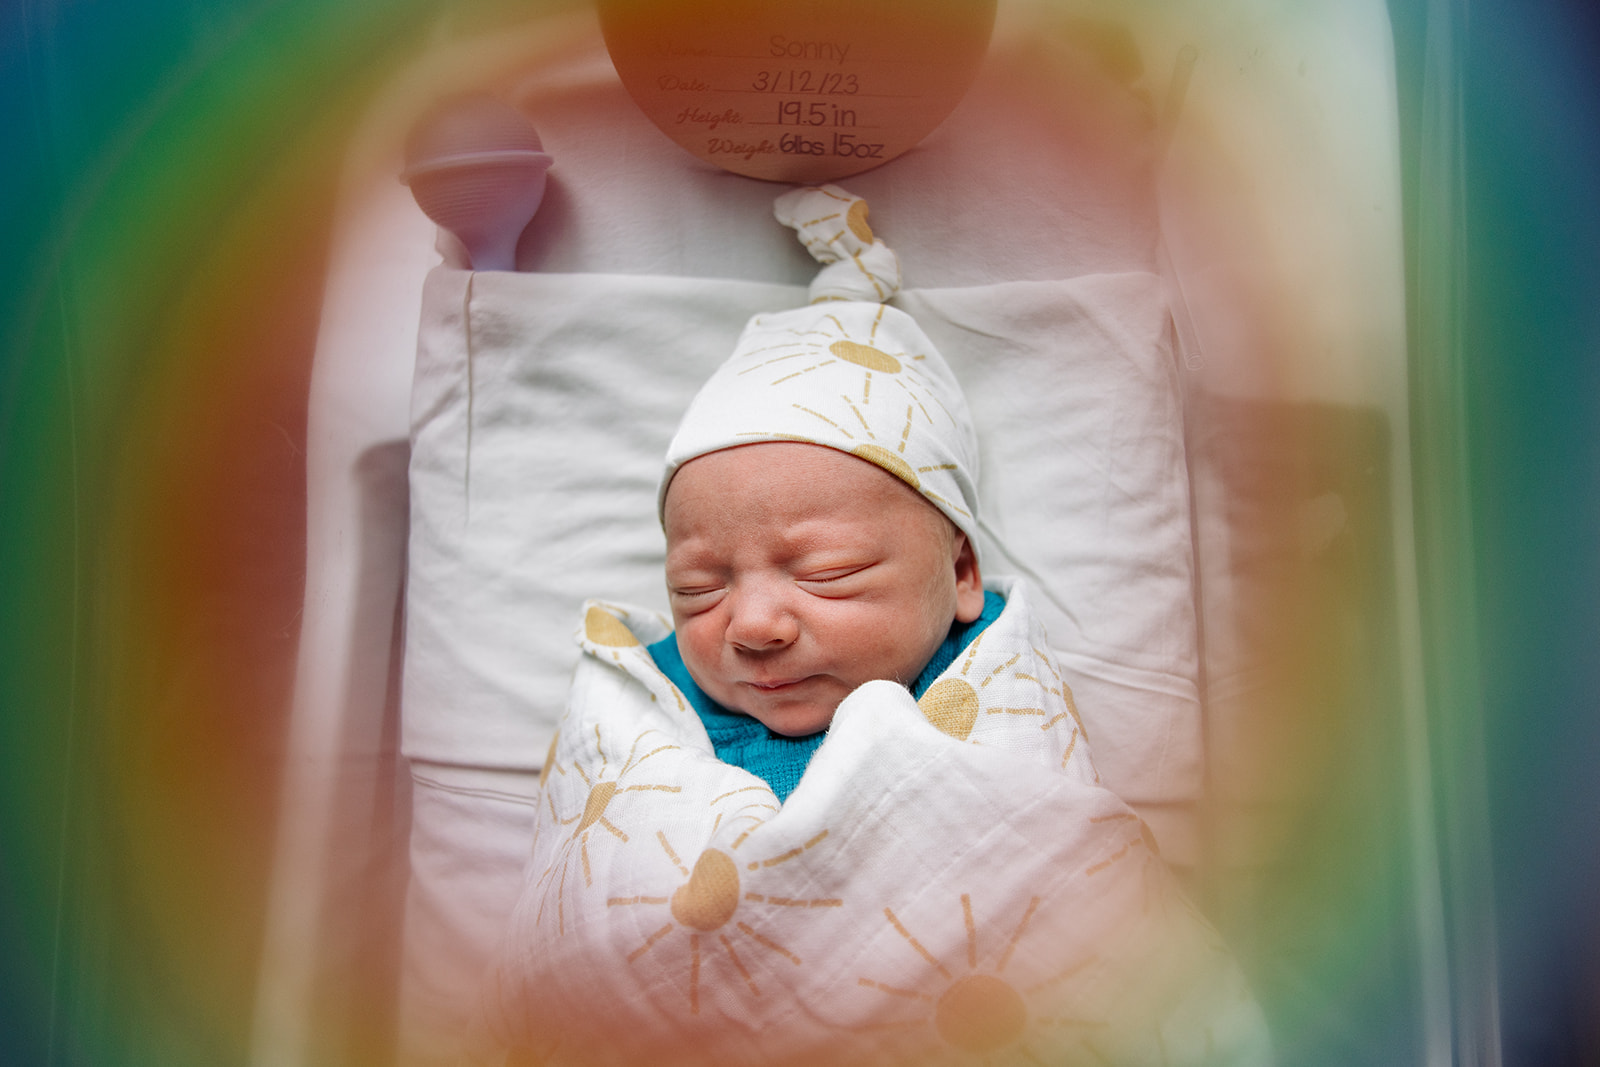 newborn photo of baby in hospital bassinet with rainbow colors all around